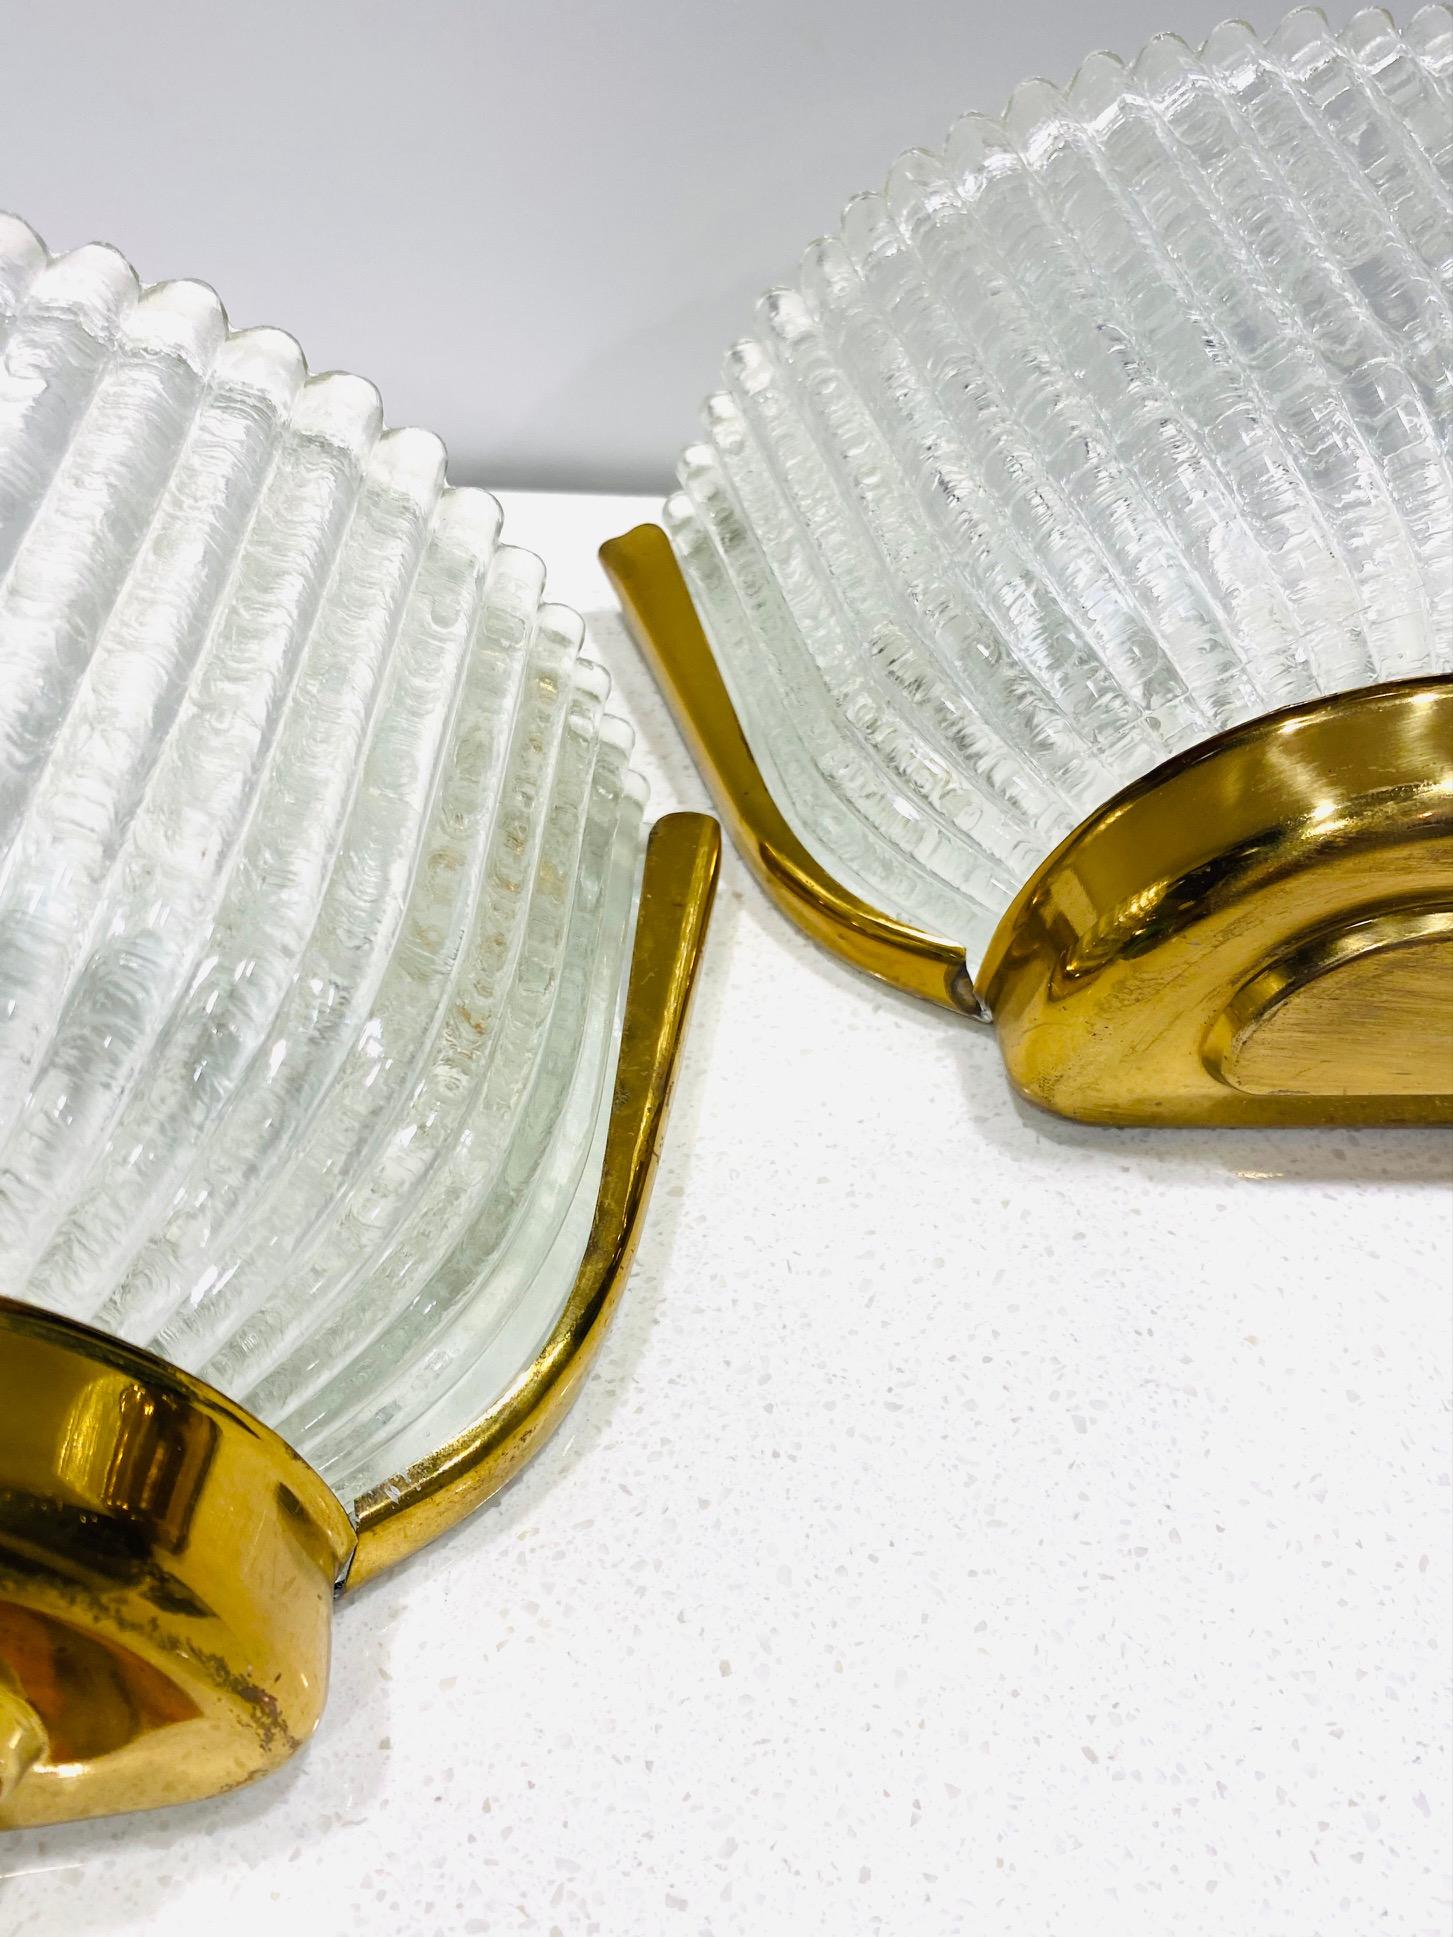 Pair of Seguso Murano Sconces with Fluted Glass and Brass Frames, circa 1940s For Sale 1